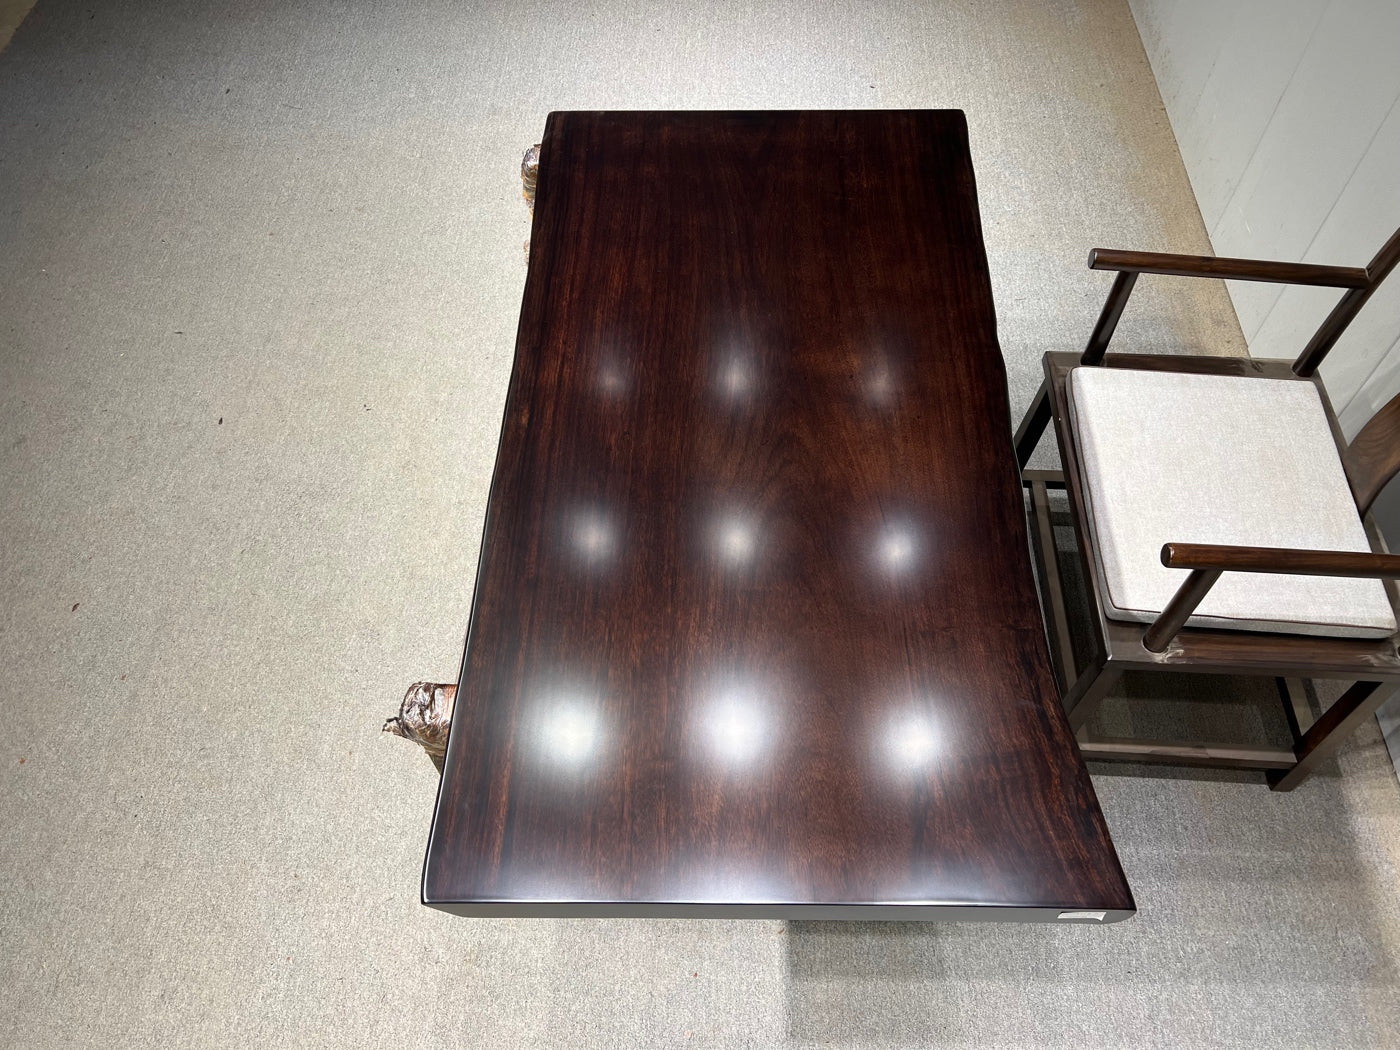 Large Raw Wood Slab Conference Table, Wester Africa wood Table, Natural Live Edge Table